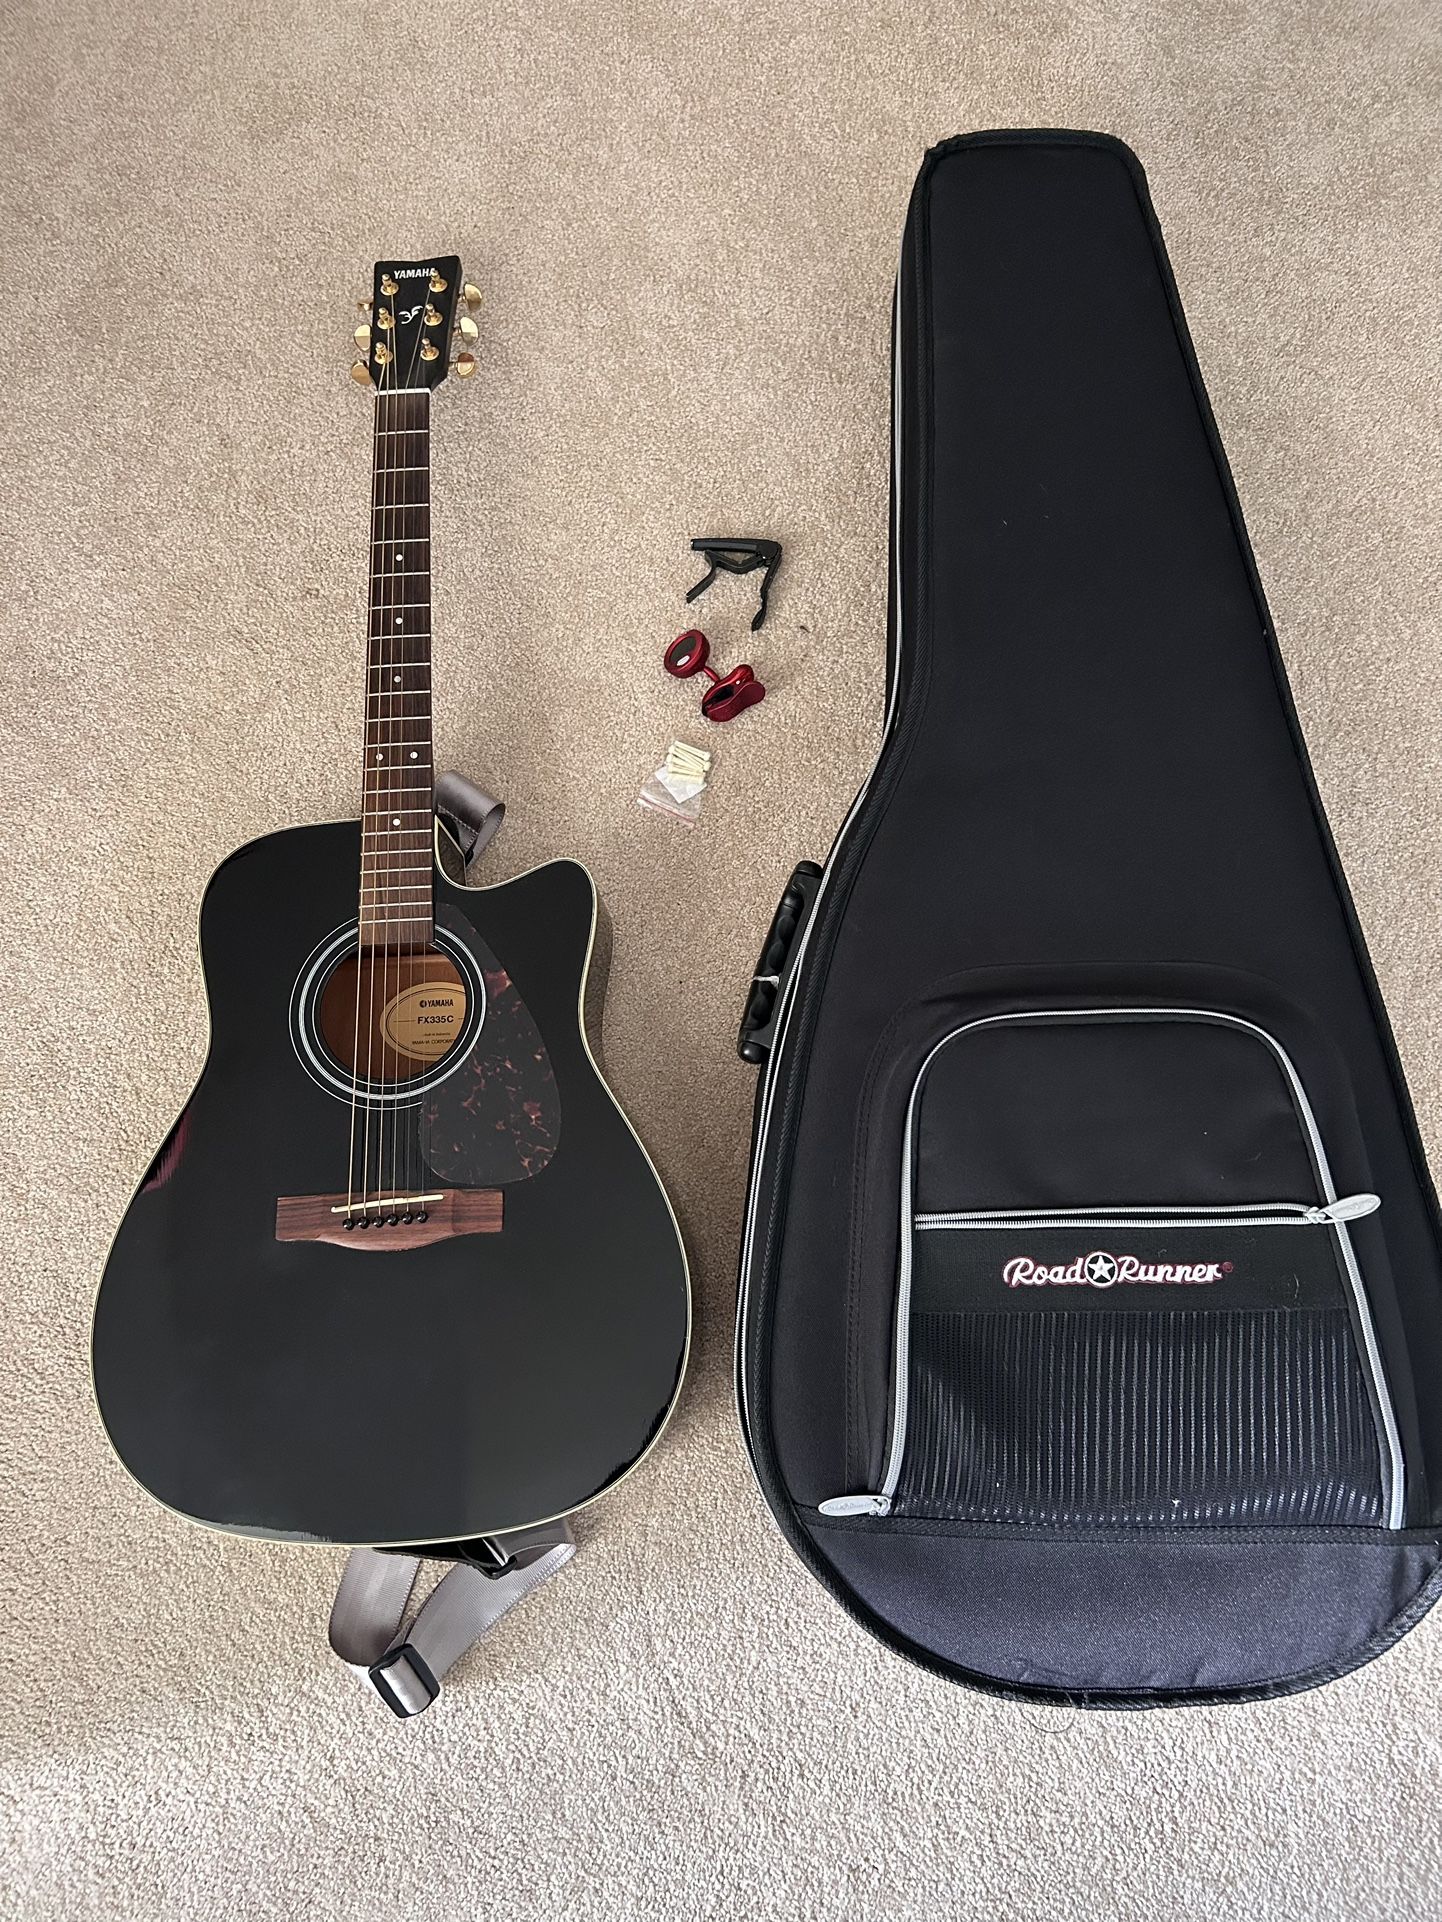 Yamaha Acoustic Guitar With Roadrunner Case 